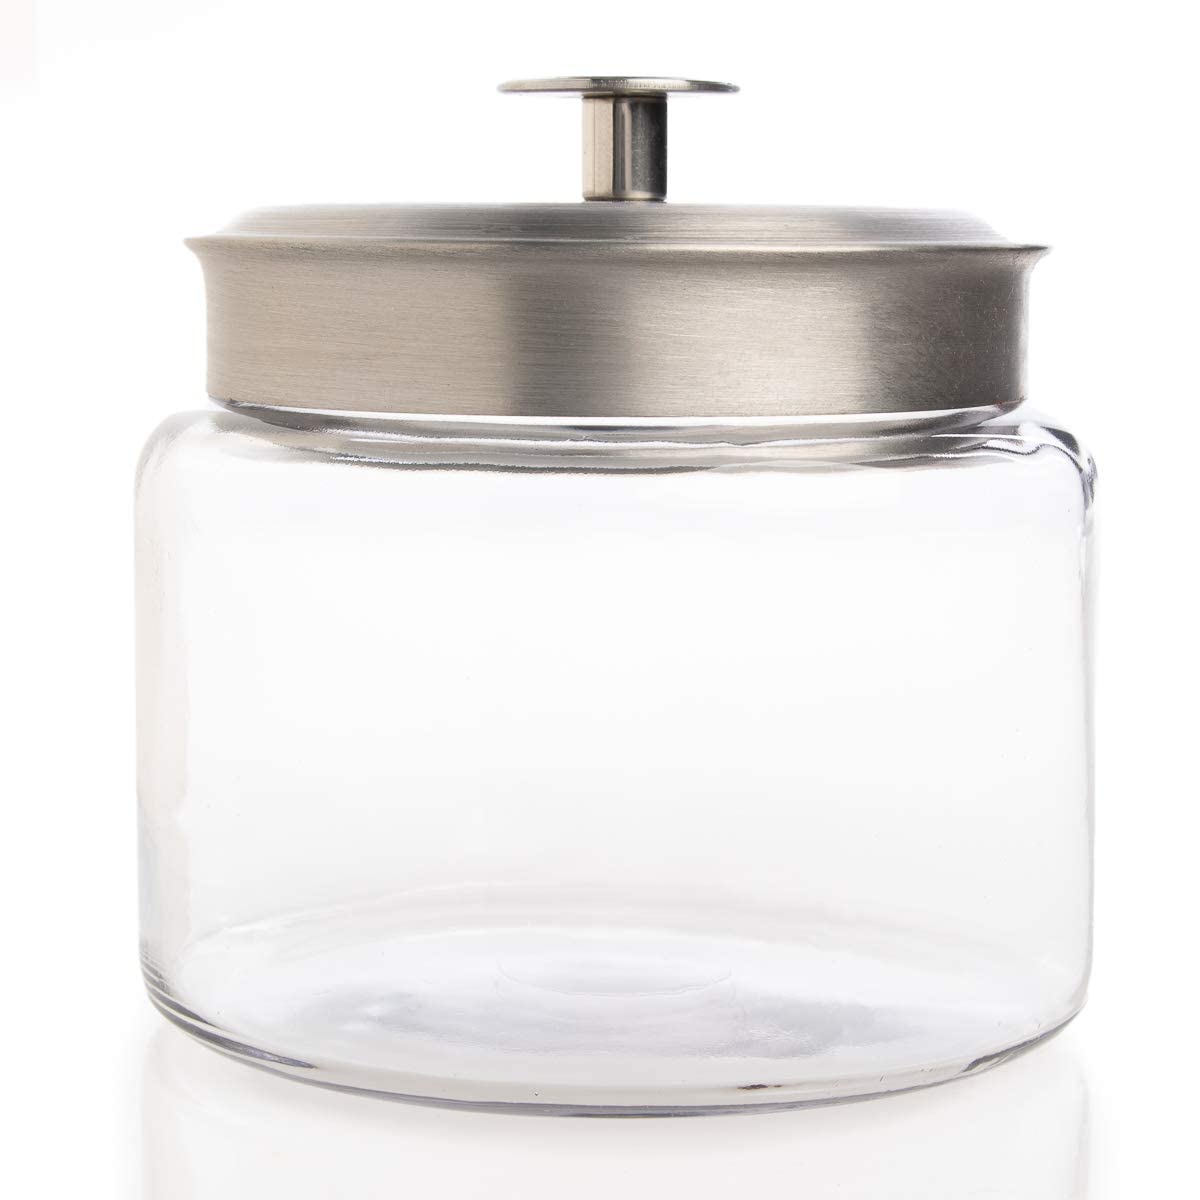 Anchor Hocking: Montana Jar with Silver Metal Top (5 size options)